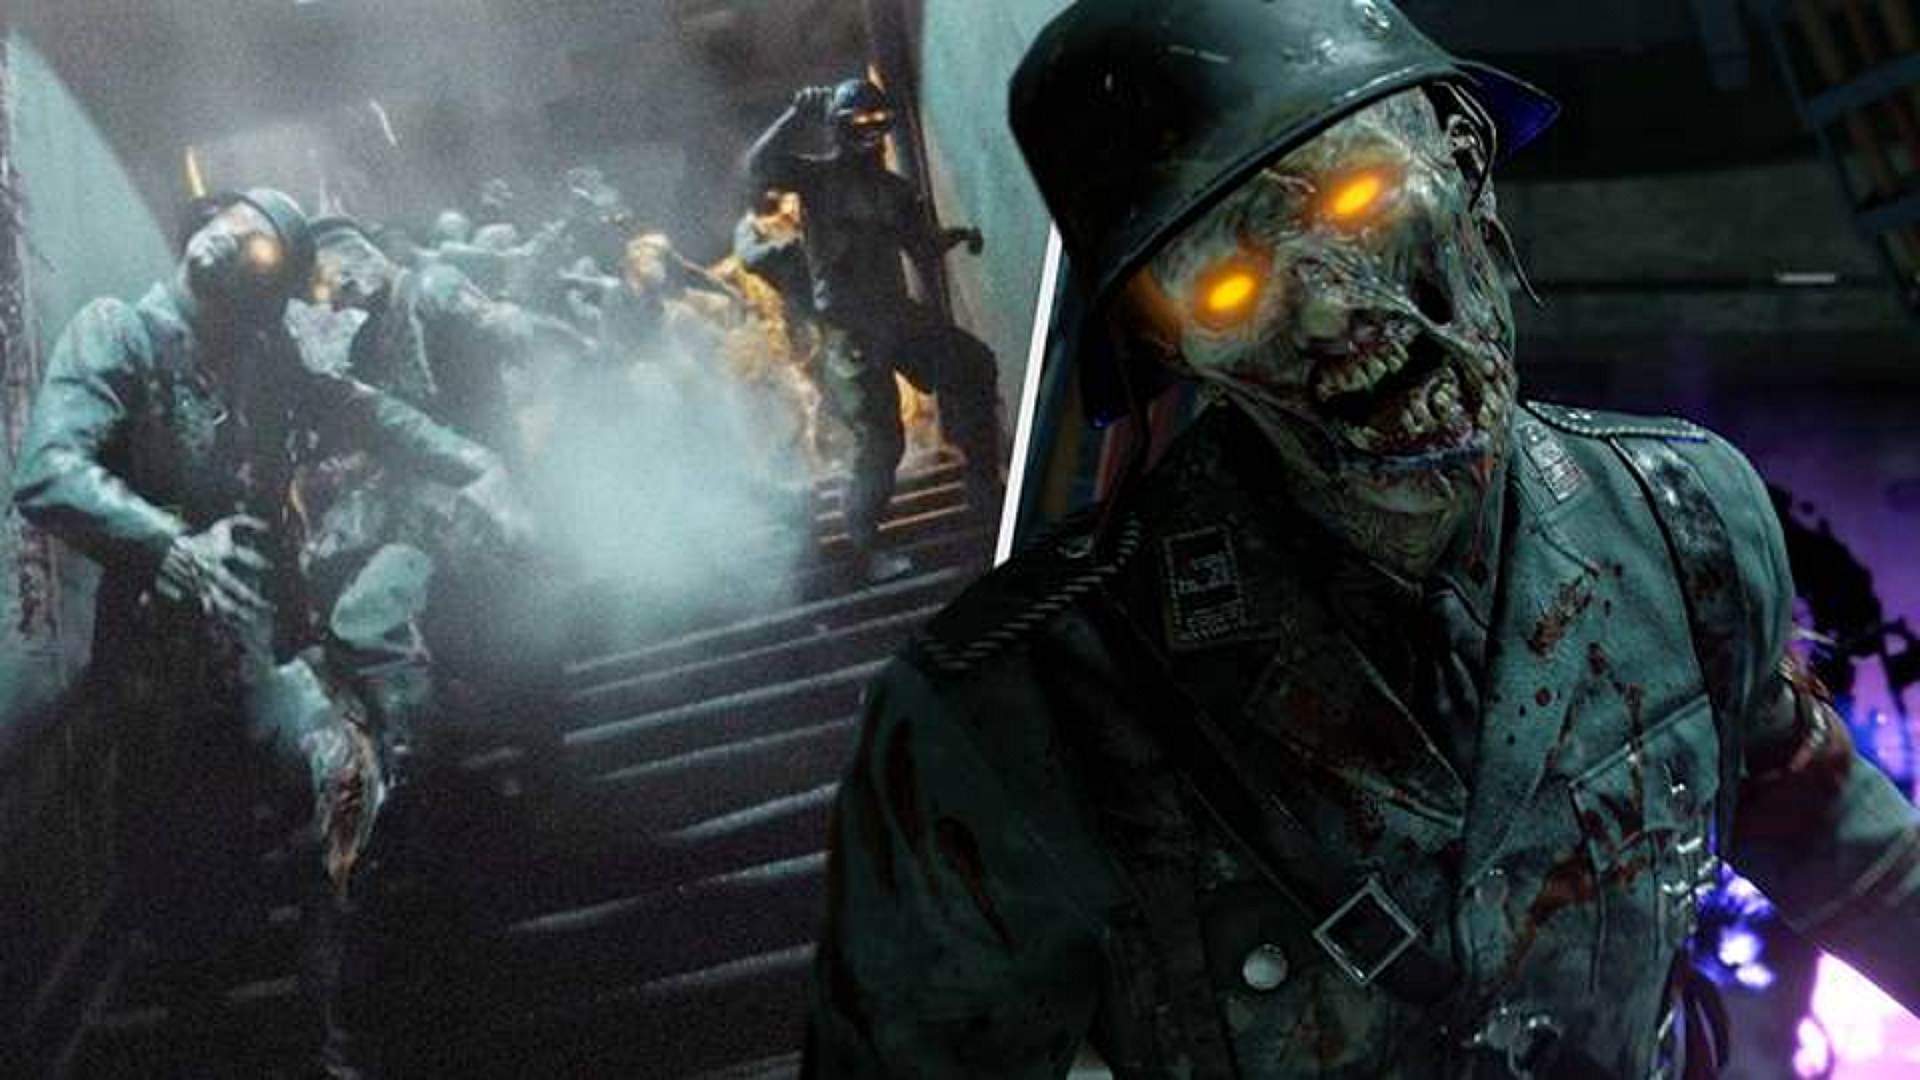 Horde of zombies in Call of Duty